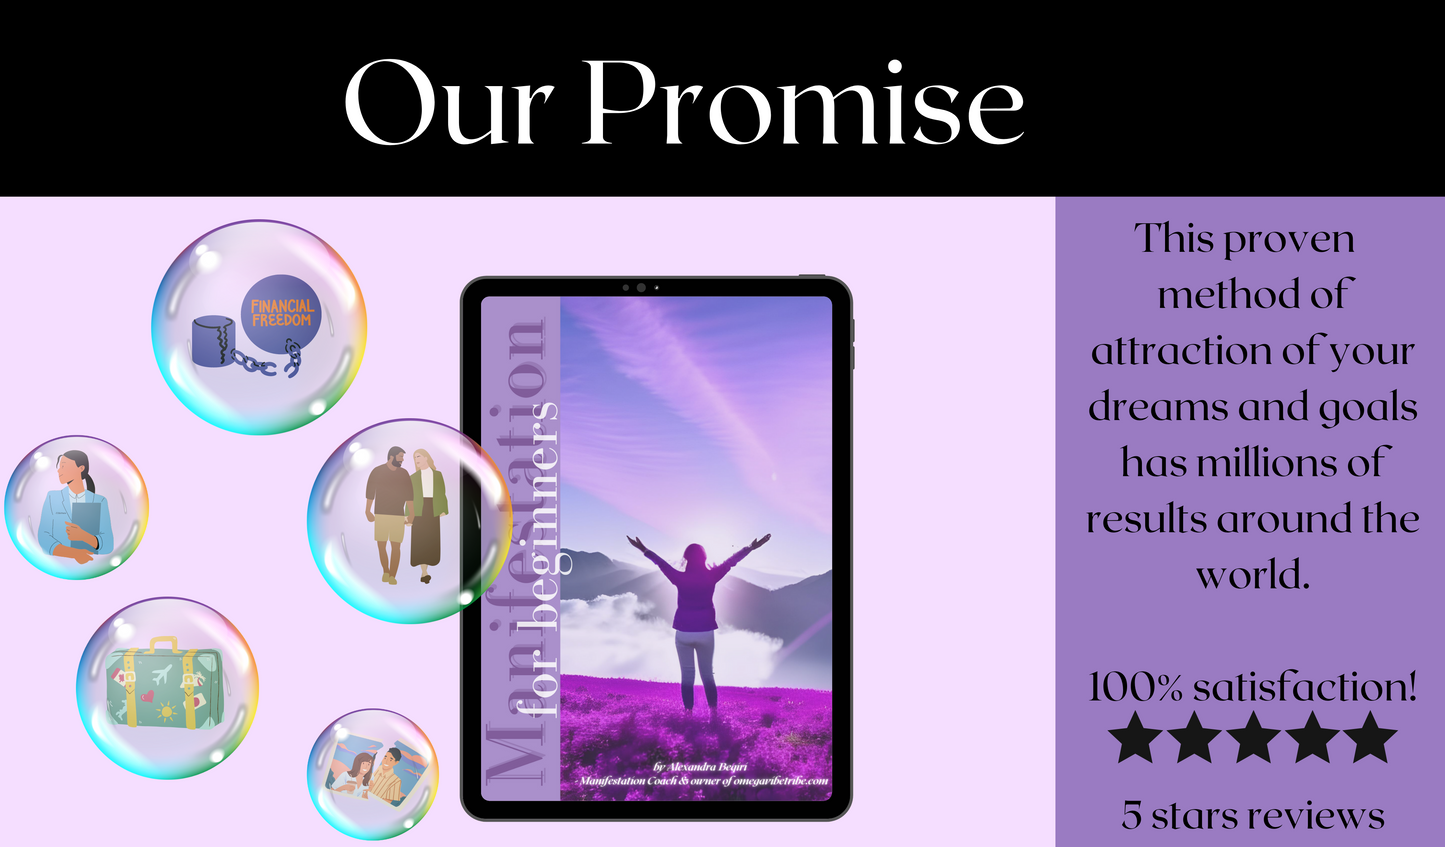 our promise that this is a proven method of attraction of your dreams and goals and that has millions of results around the world.